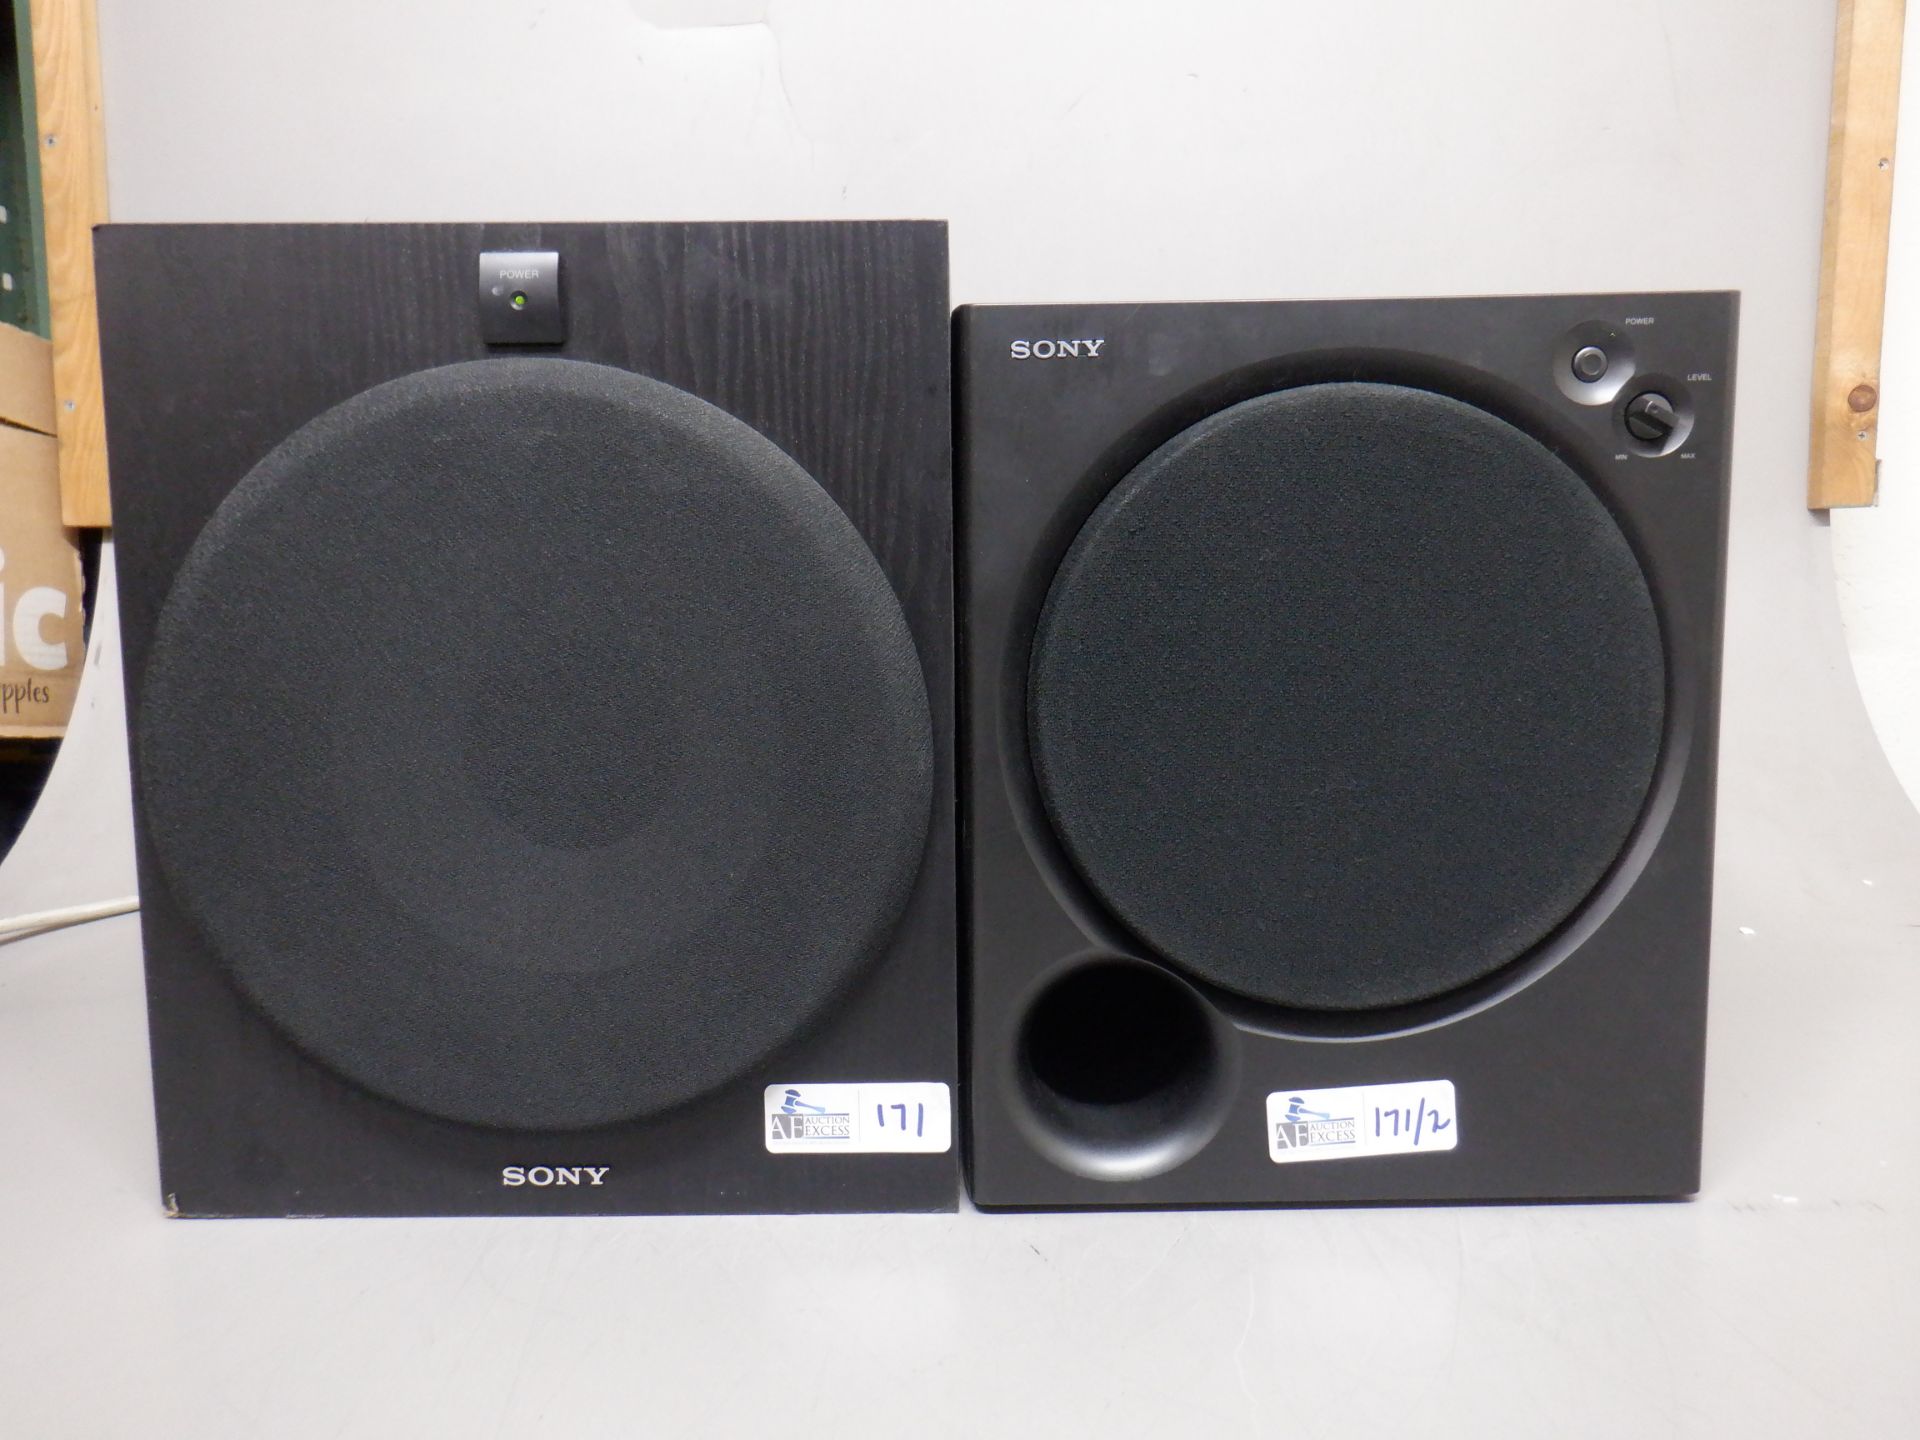 LOT OF 2 SONY ACTIVE SUBWOOFERS SA-W2500